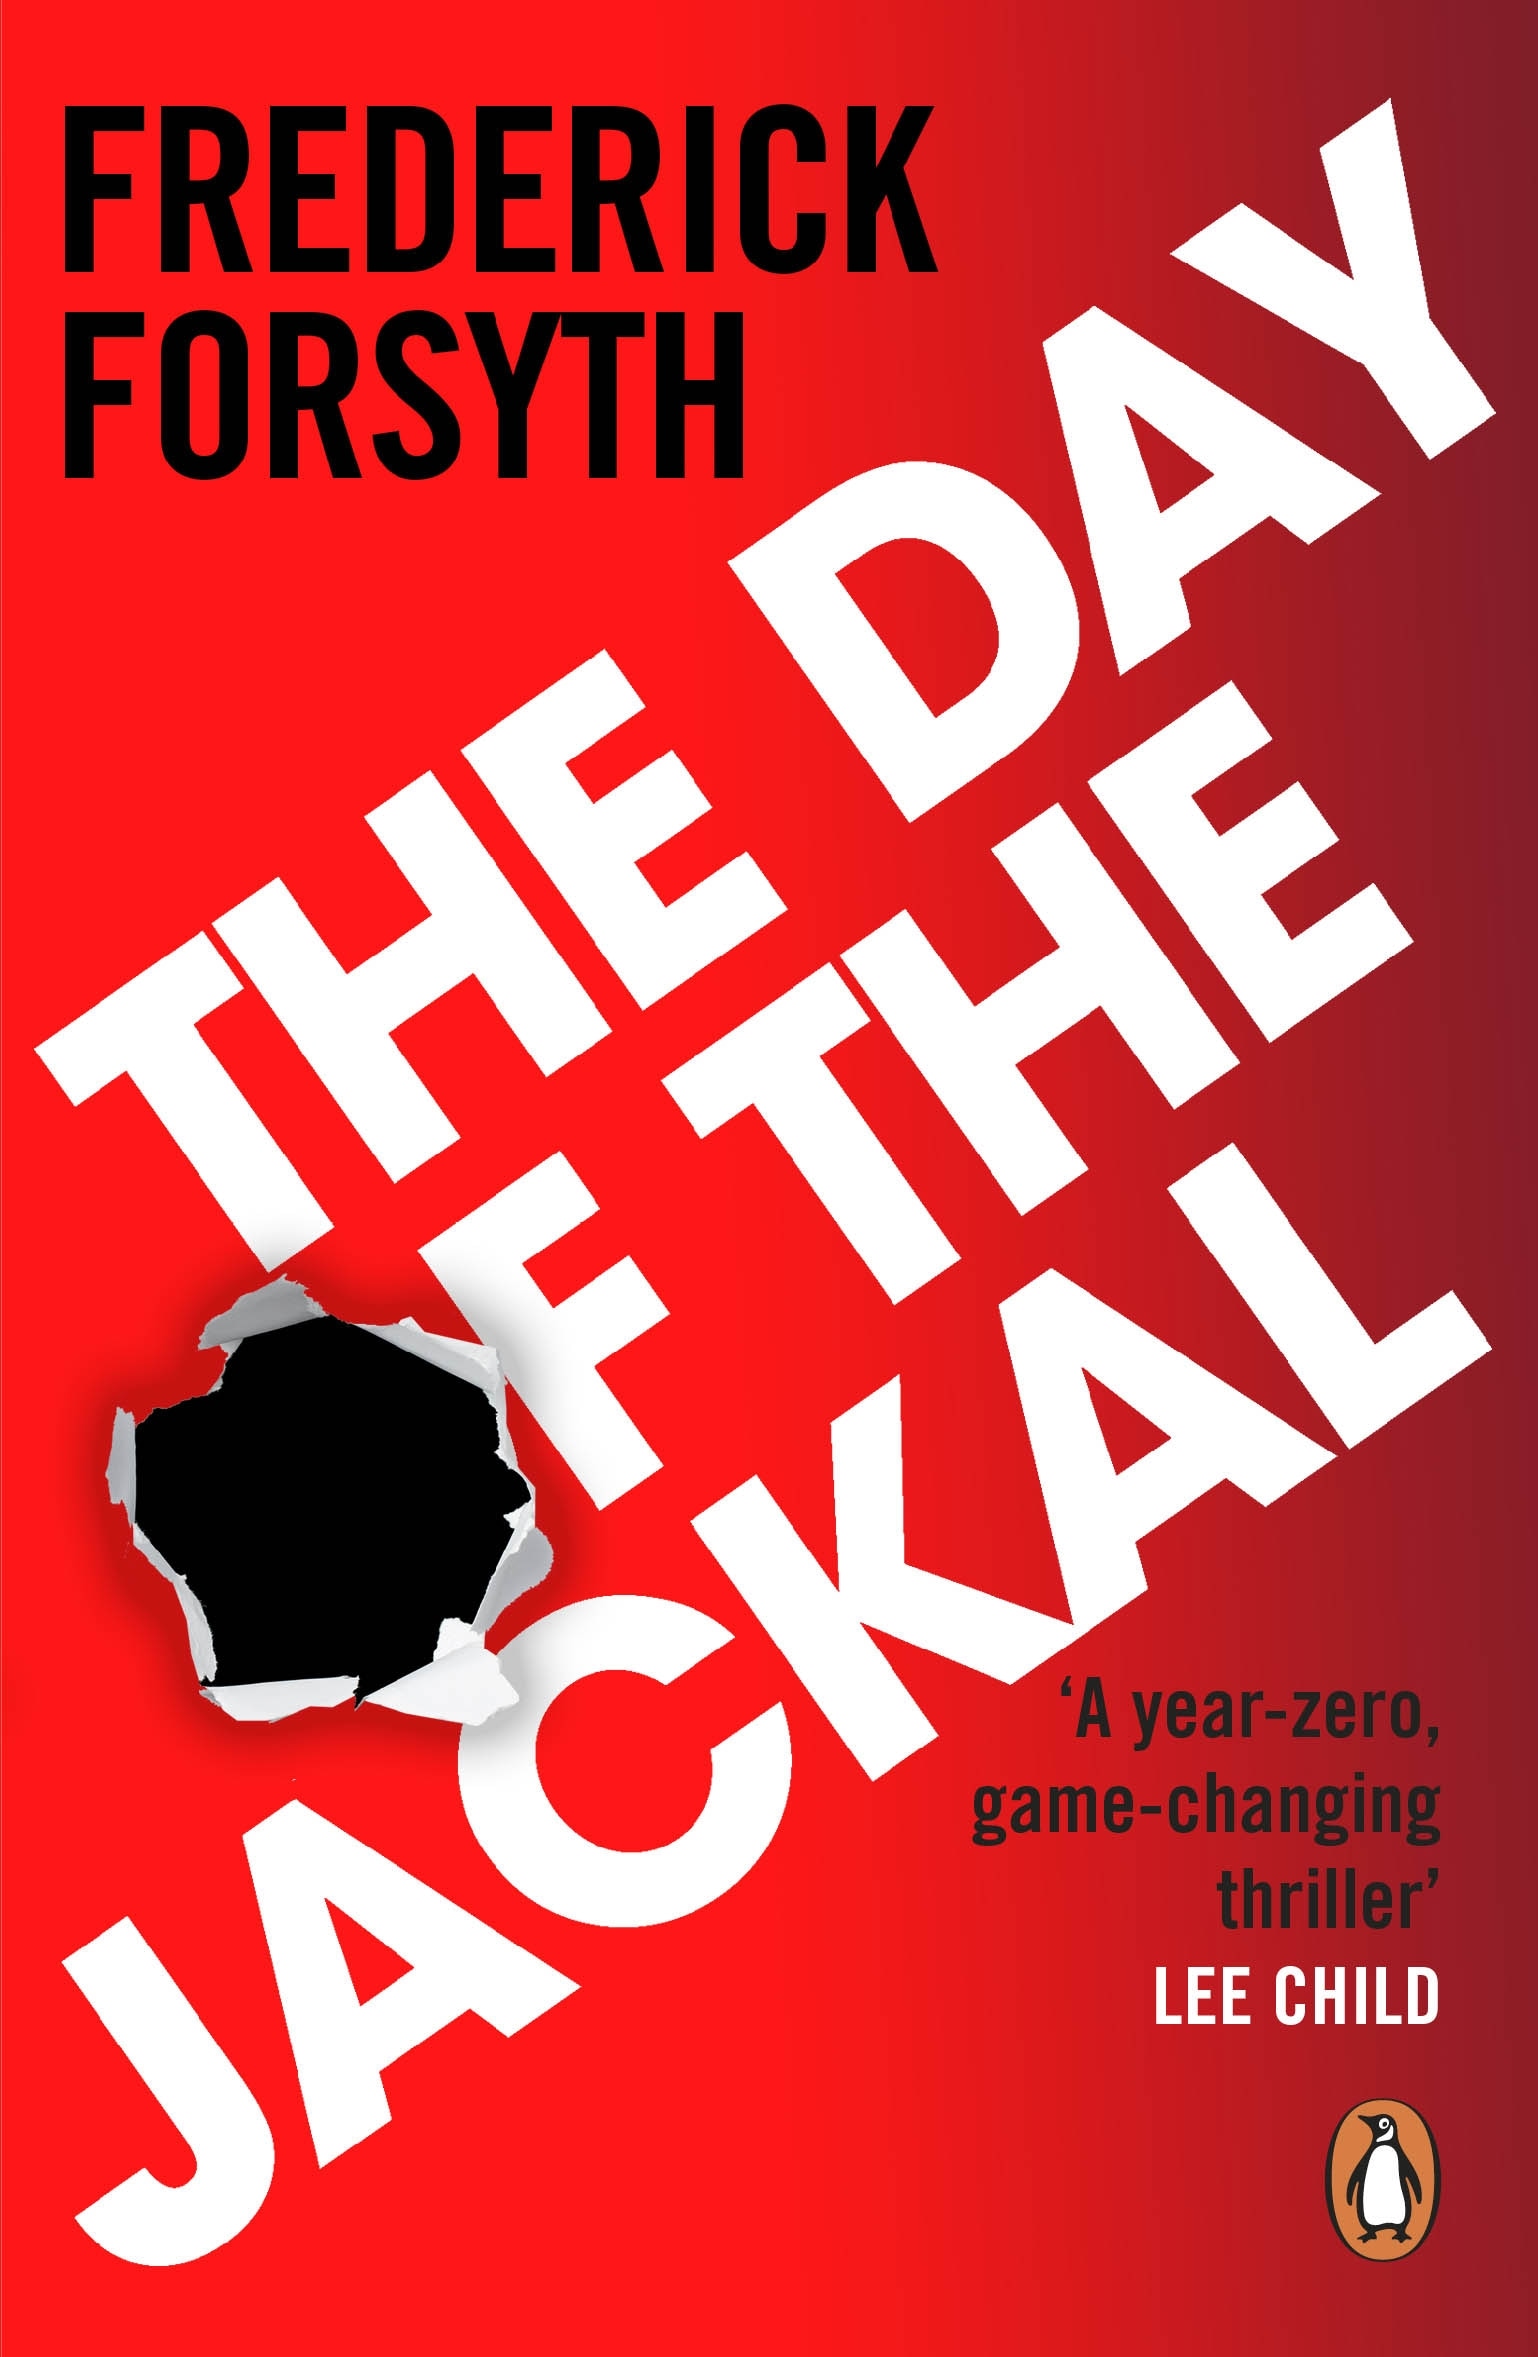 Book “The Day of the Jackal” by Frederick Forsyth — April 7, 2011